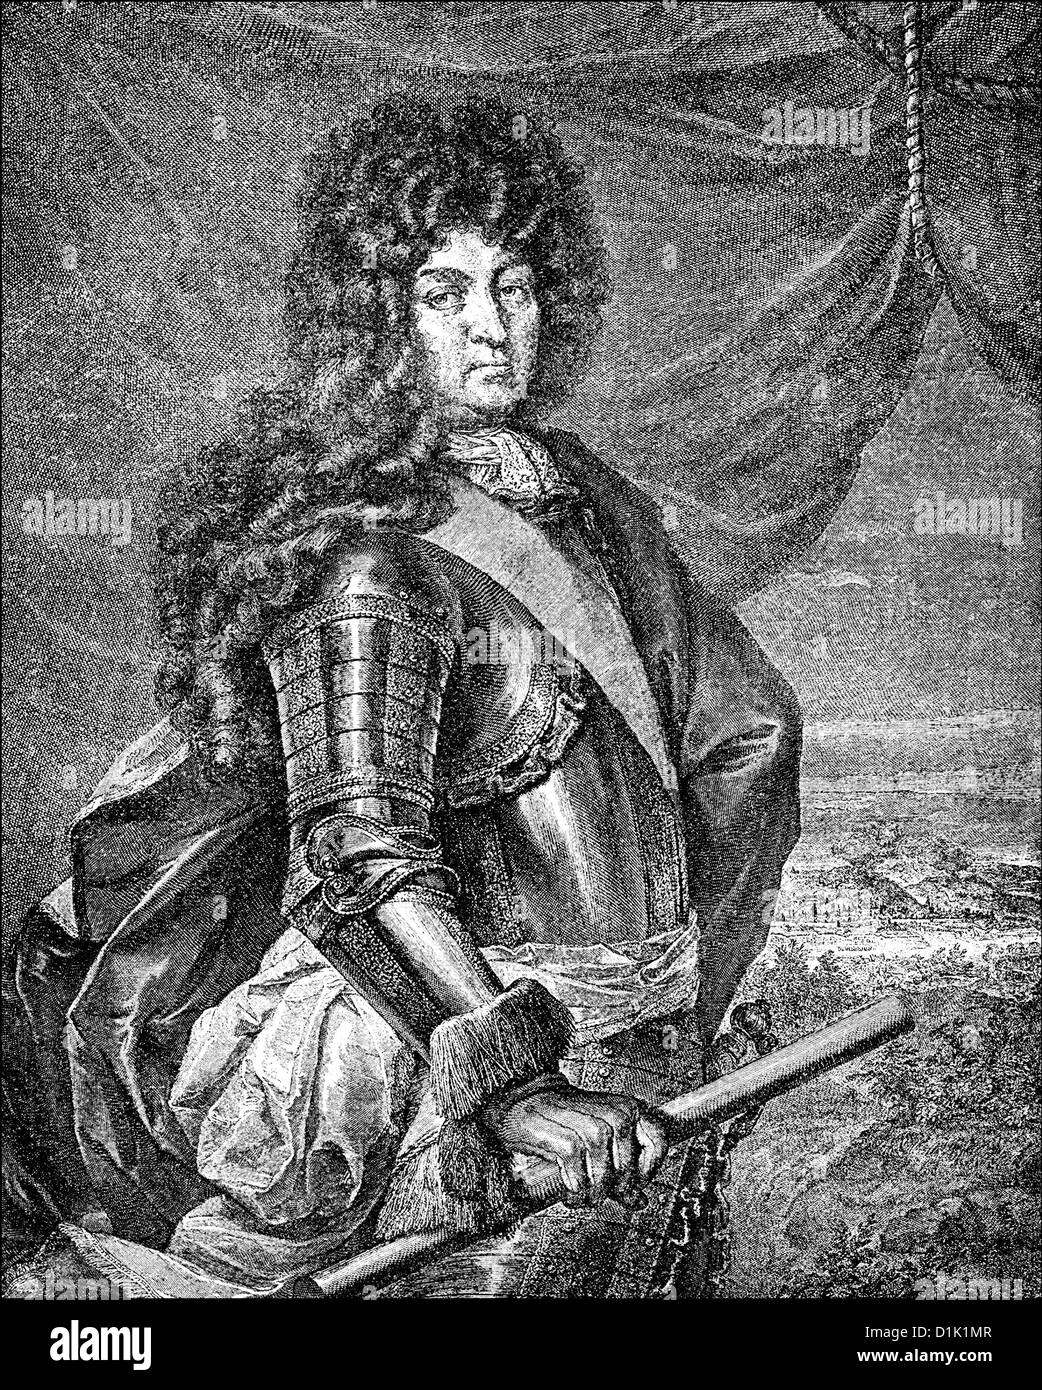 Louis XIV, Louis le Grand, 1638 - 1715, King of France and Navarre Stock Photo: 52664215 - Alamy